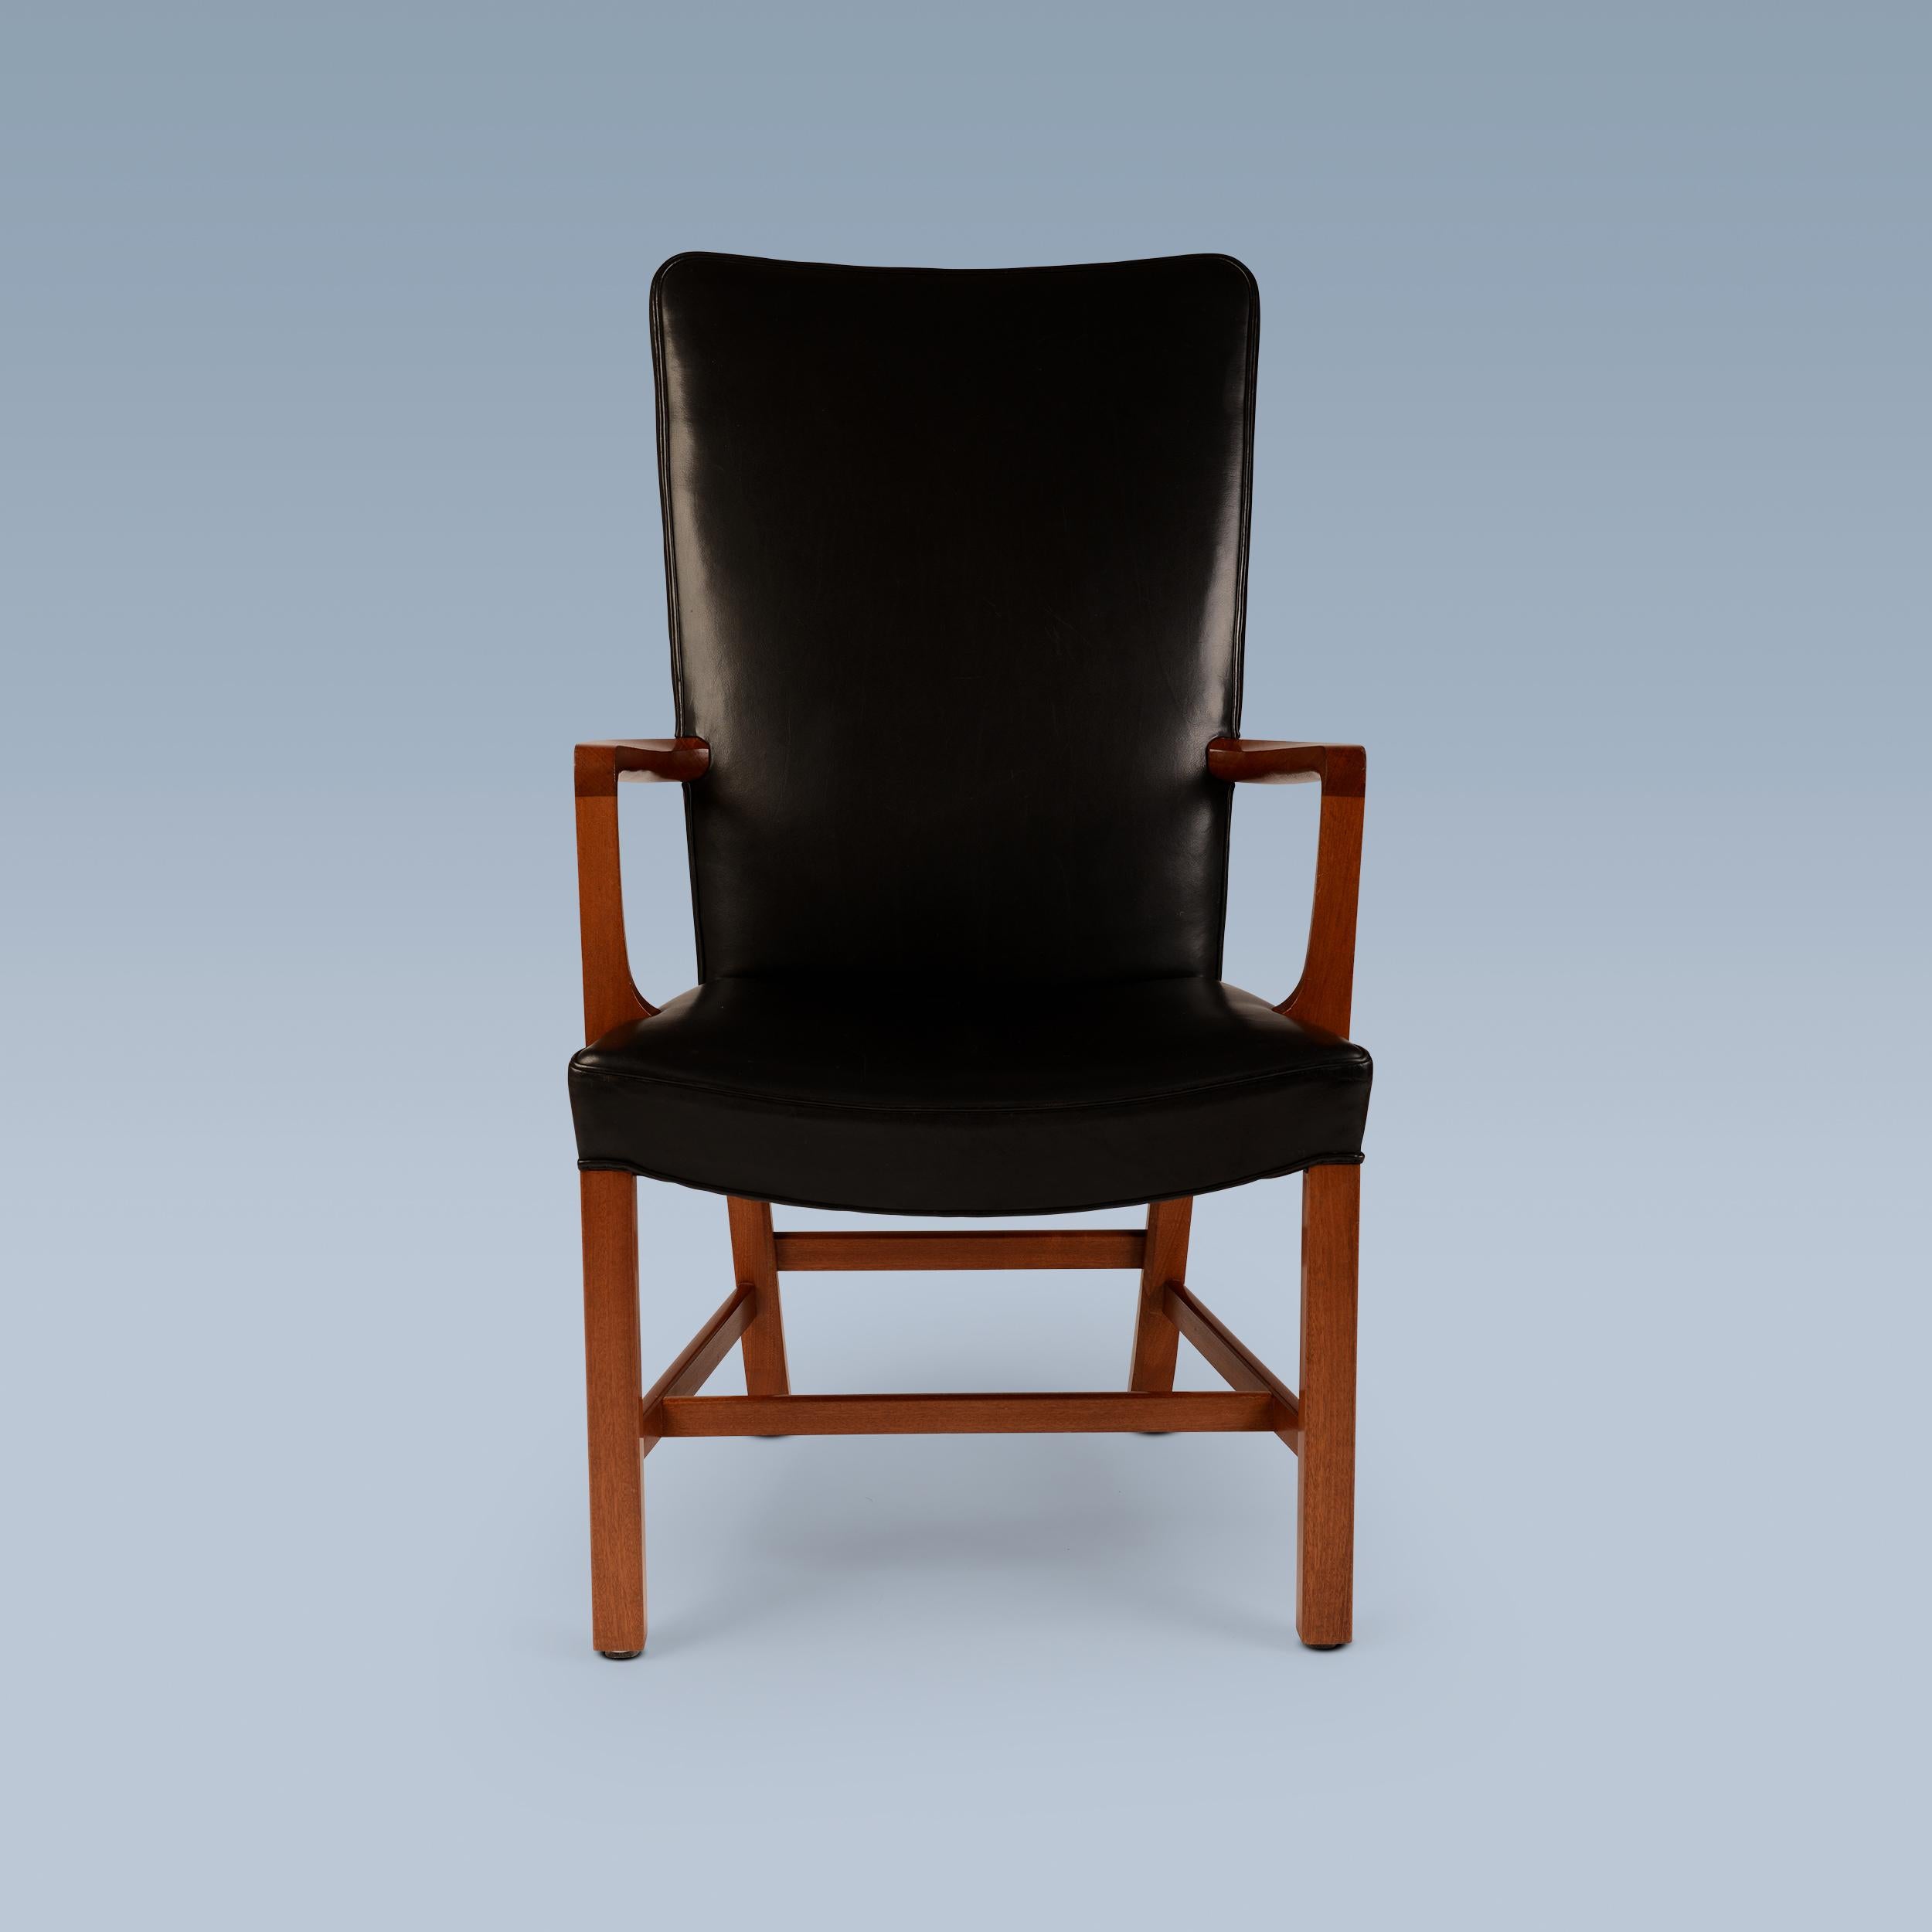 This high back armchair of mahogany was designed by Kaare Klint (1888-1954) back in 1939.
It was manufactured by Rud. Rasmussen Cabinetmakers, Denmark.
The model is called ‘Nørrevold’ after the location of the building in central Copenhagen it was